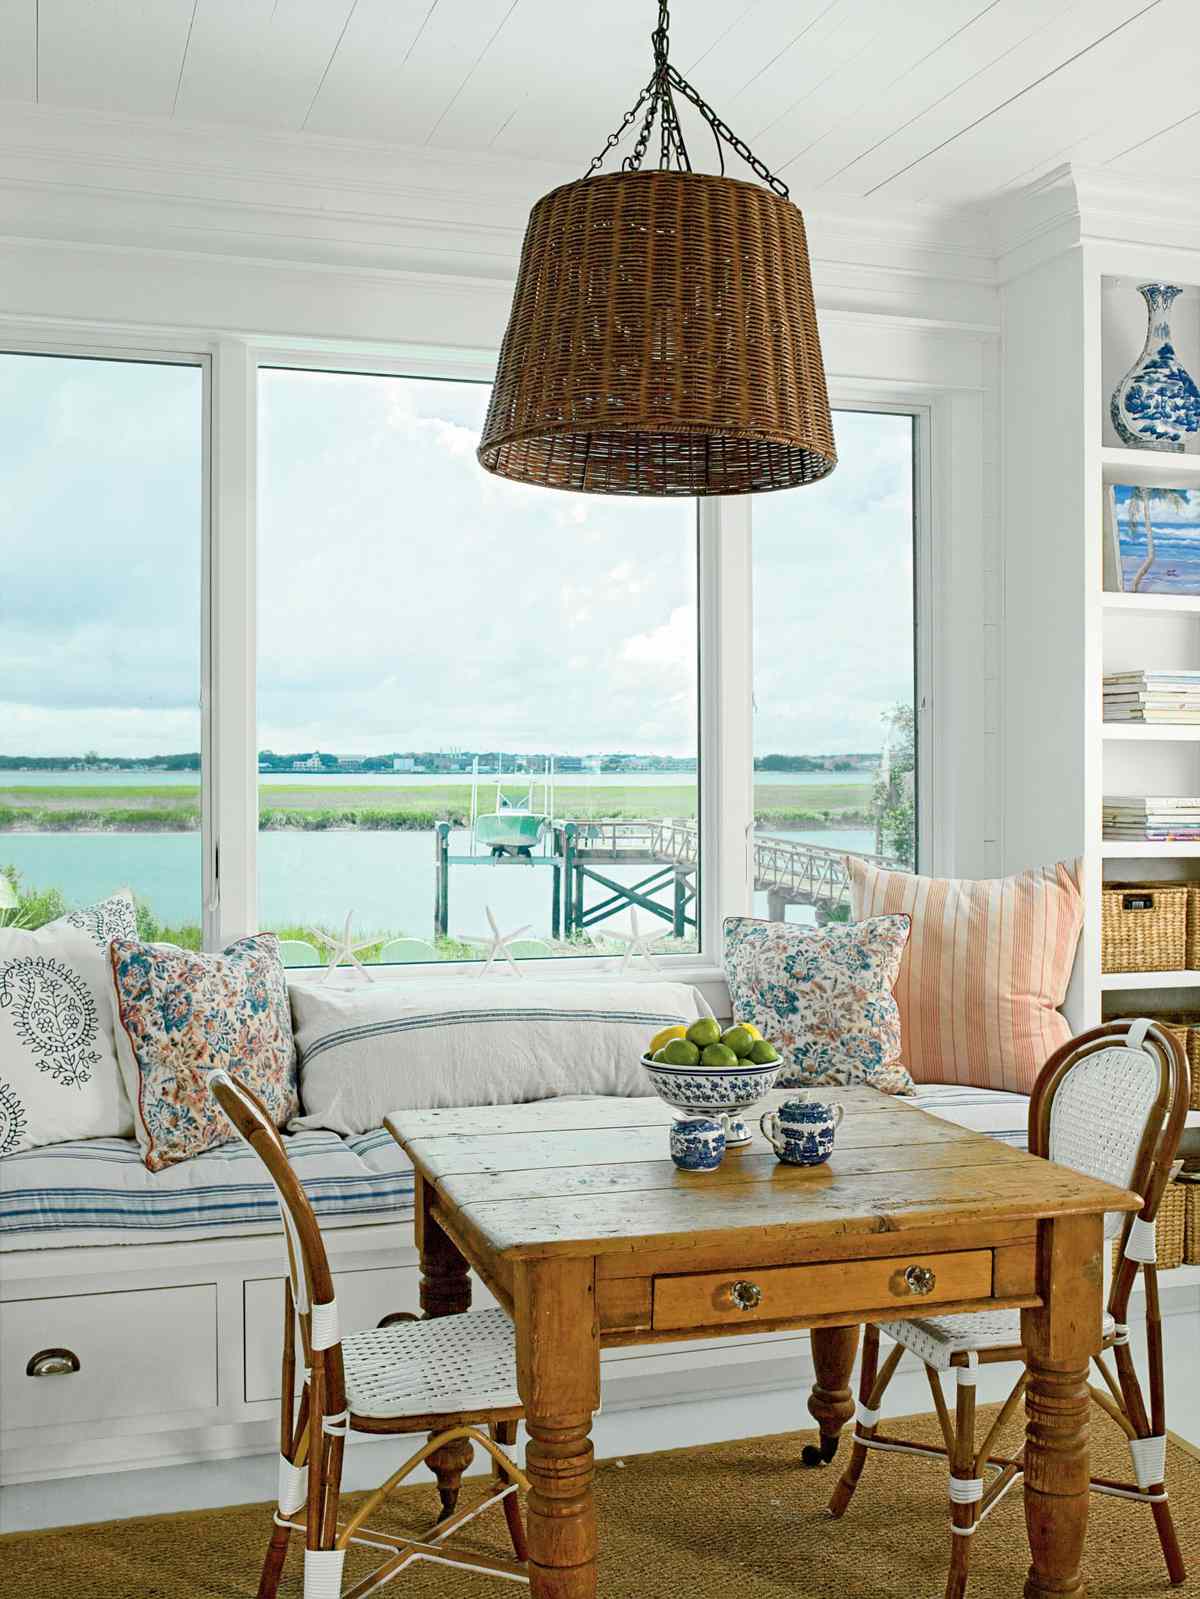 <p>This welcoming breakfast nook has a built-in bench with cabinets underneath for extra storage. Pile it high with pillows for a snug spot to watch the water. The woven hanging lamp and pretty patterns offer texture and interest to this small space.</p>
                            